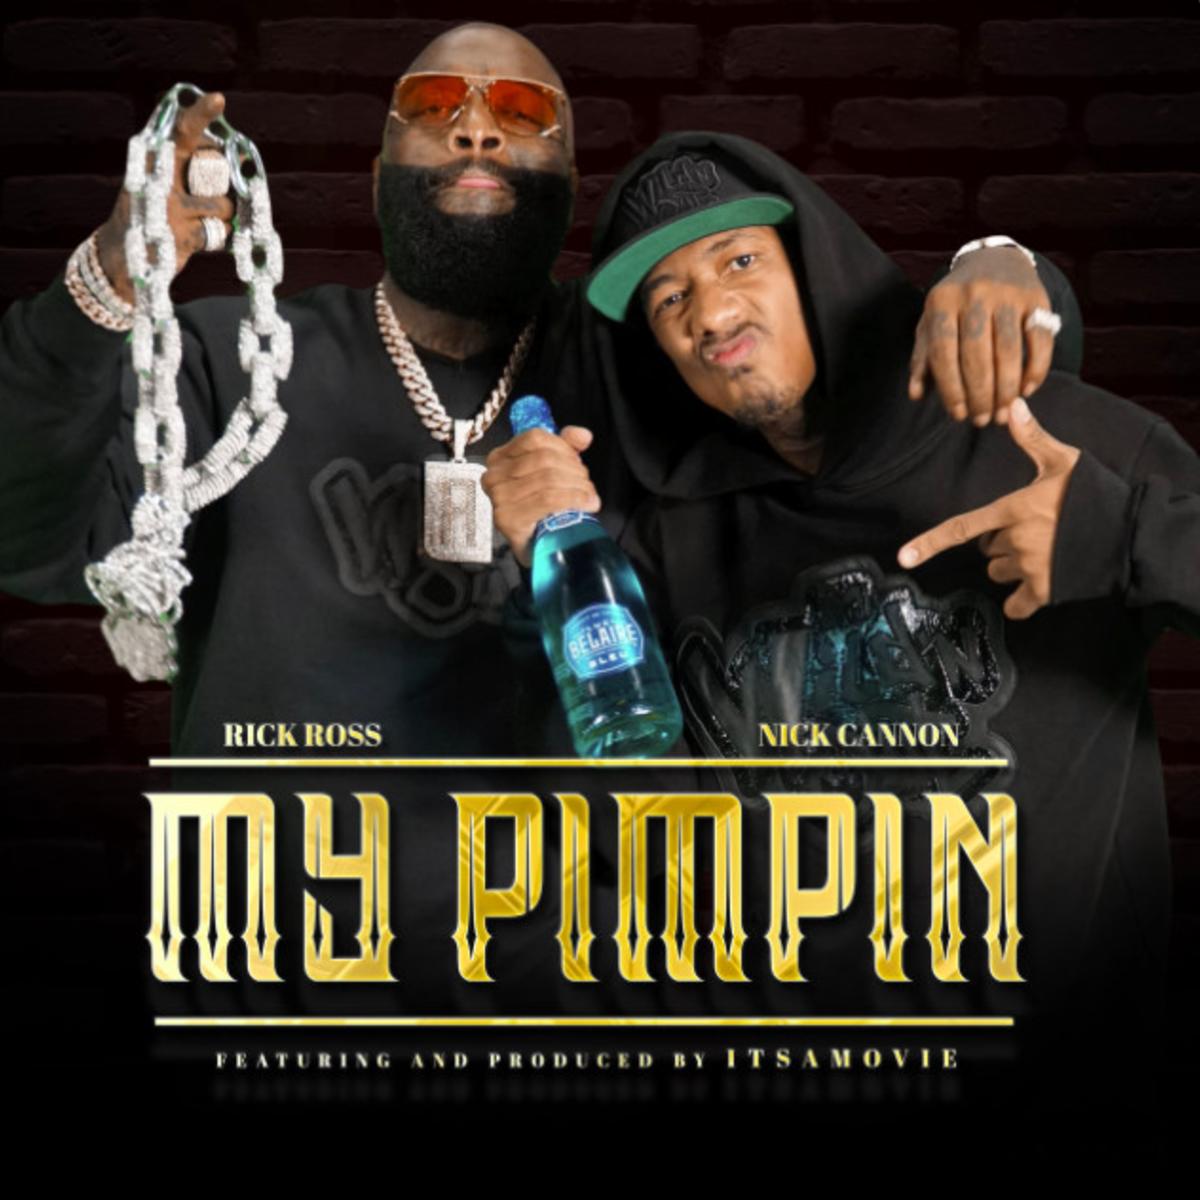 Nick Cannon Calls On ItsAMovie & Rick Ross For “My Pimpin”